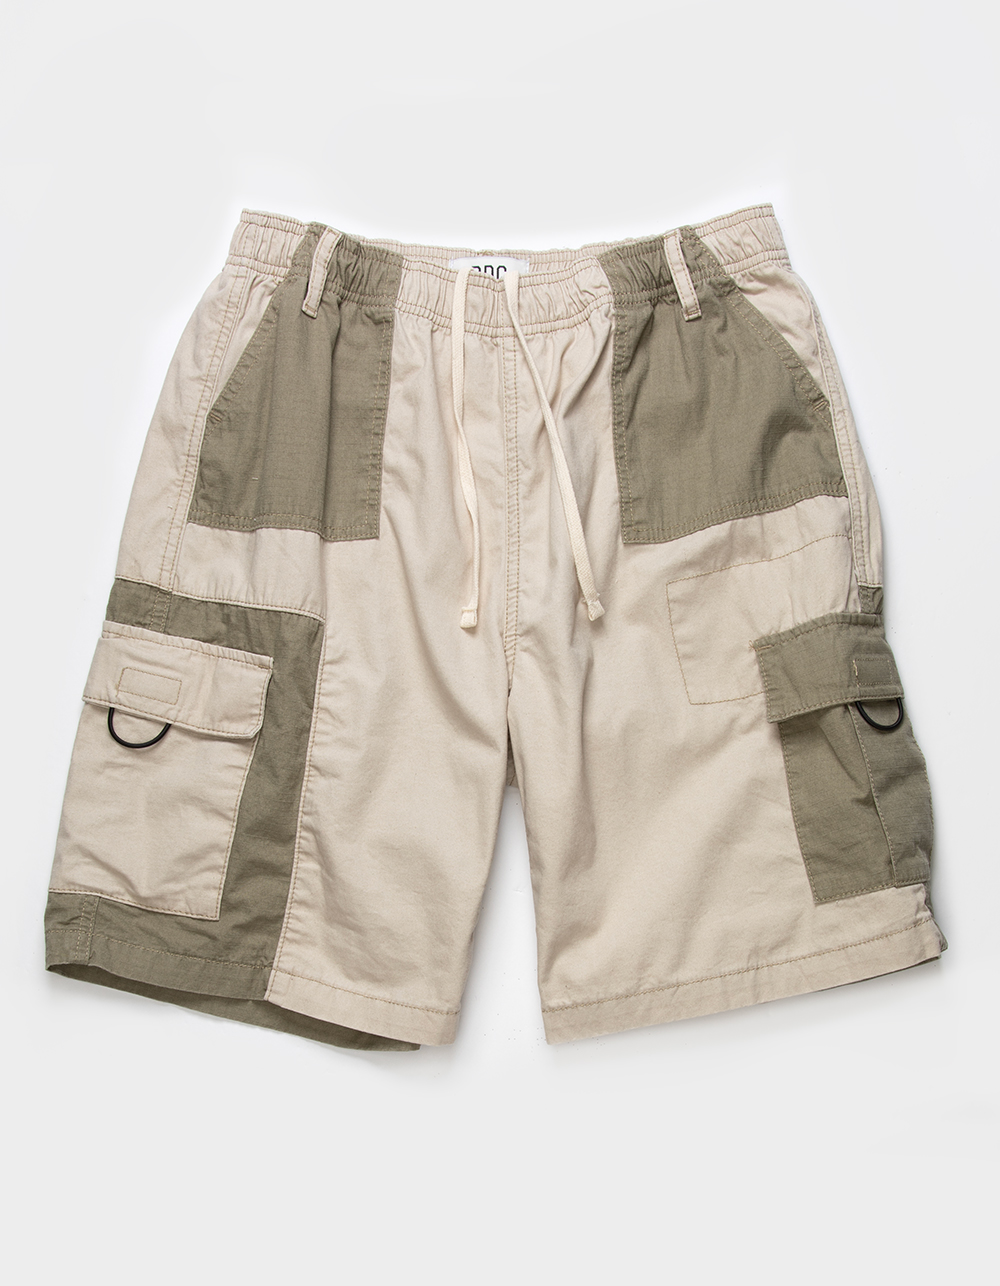 BDG Urban Outfitters Mens Ripstop Cargo Shorts